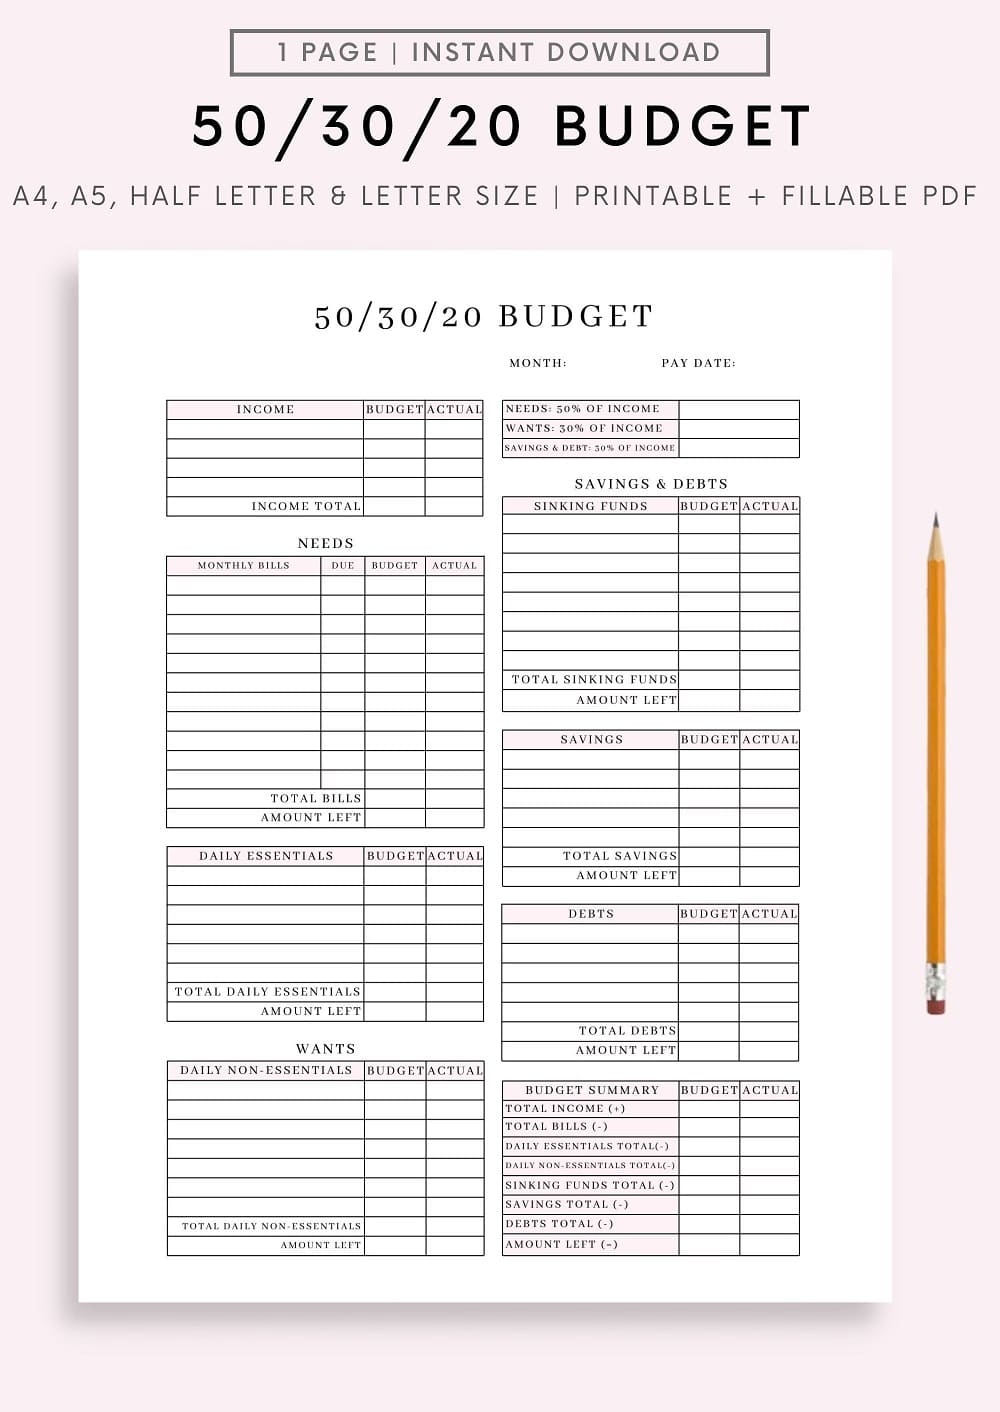 Printable 50-30-20 Budget Template Images